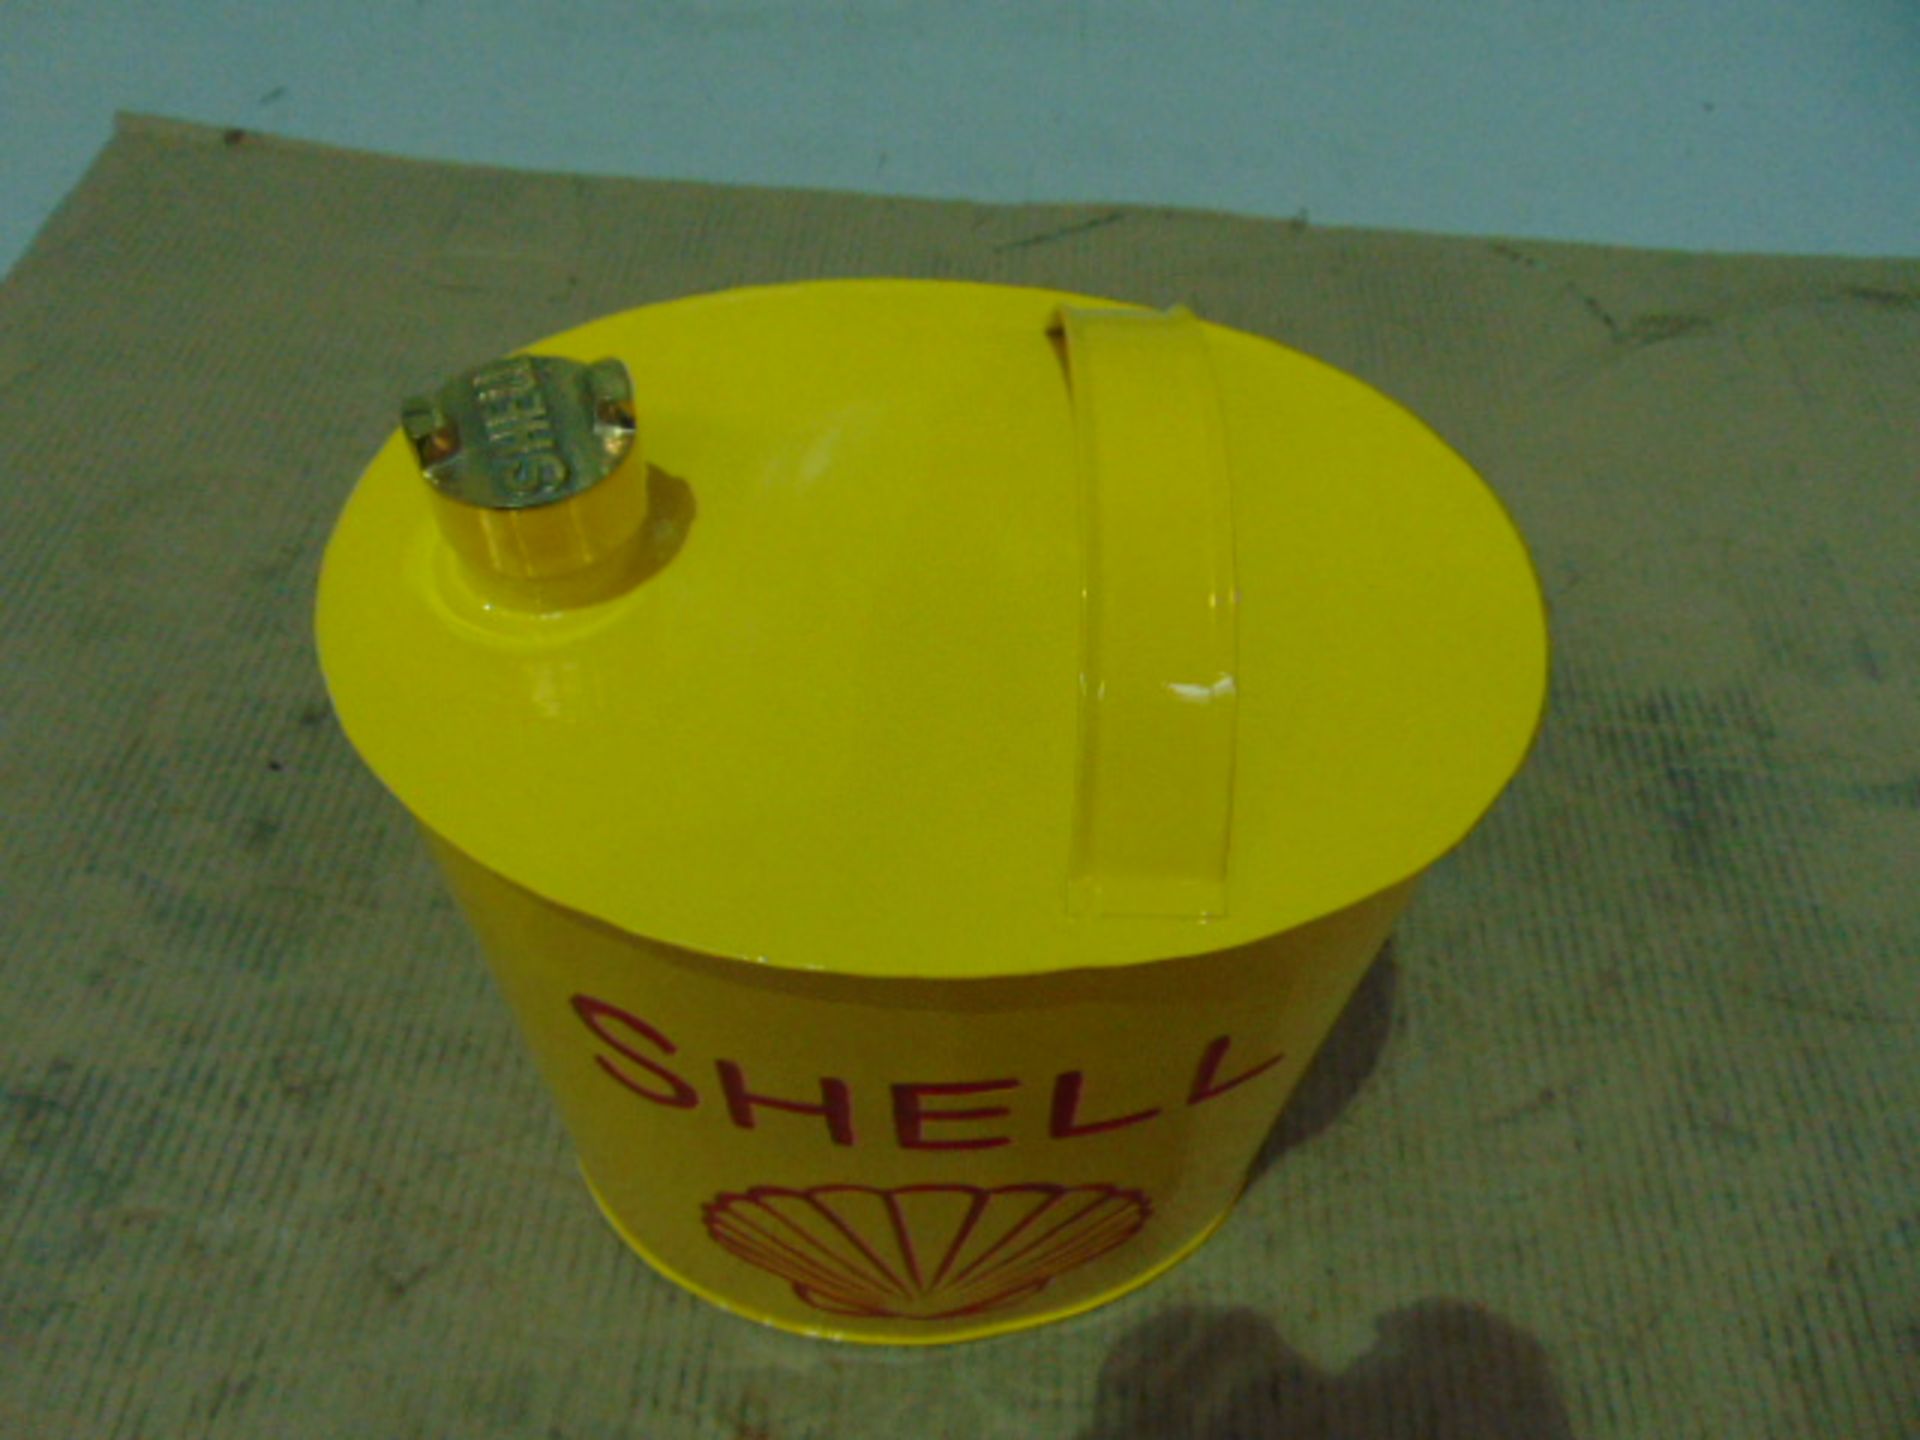 Shell Branded Oil Can - Image 4 of 6